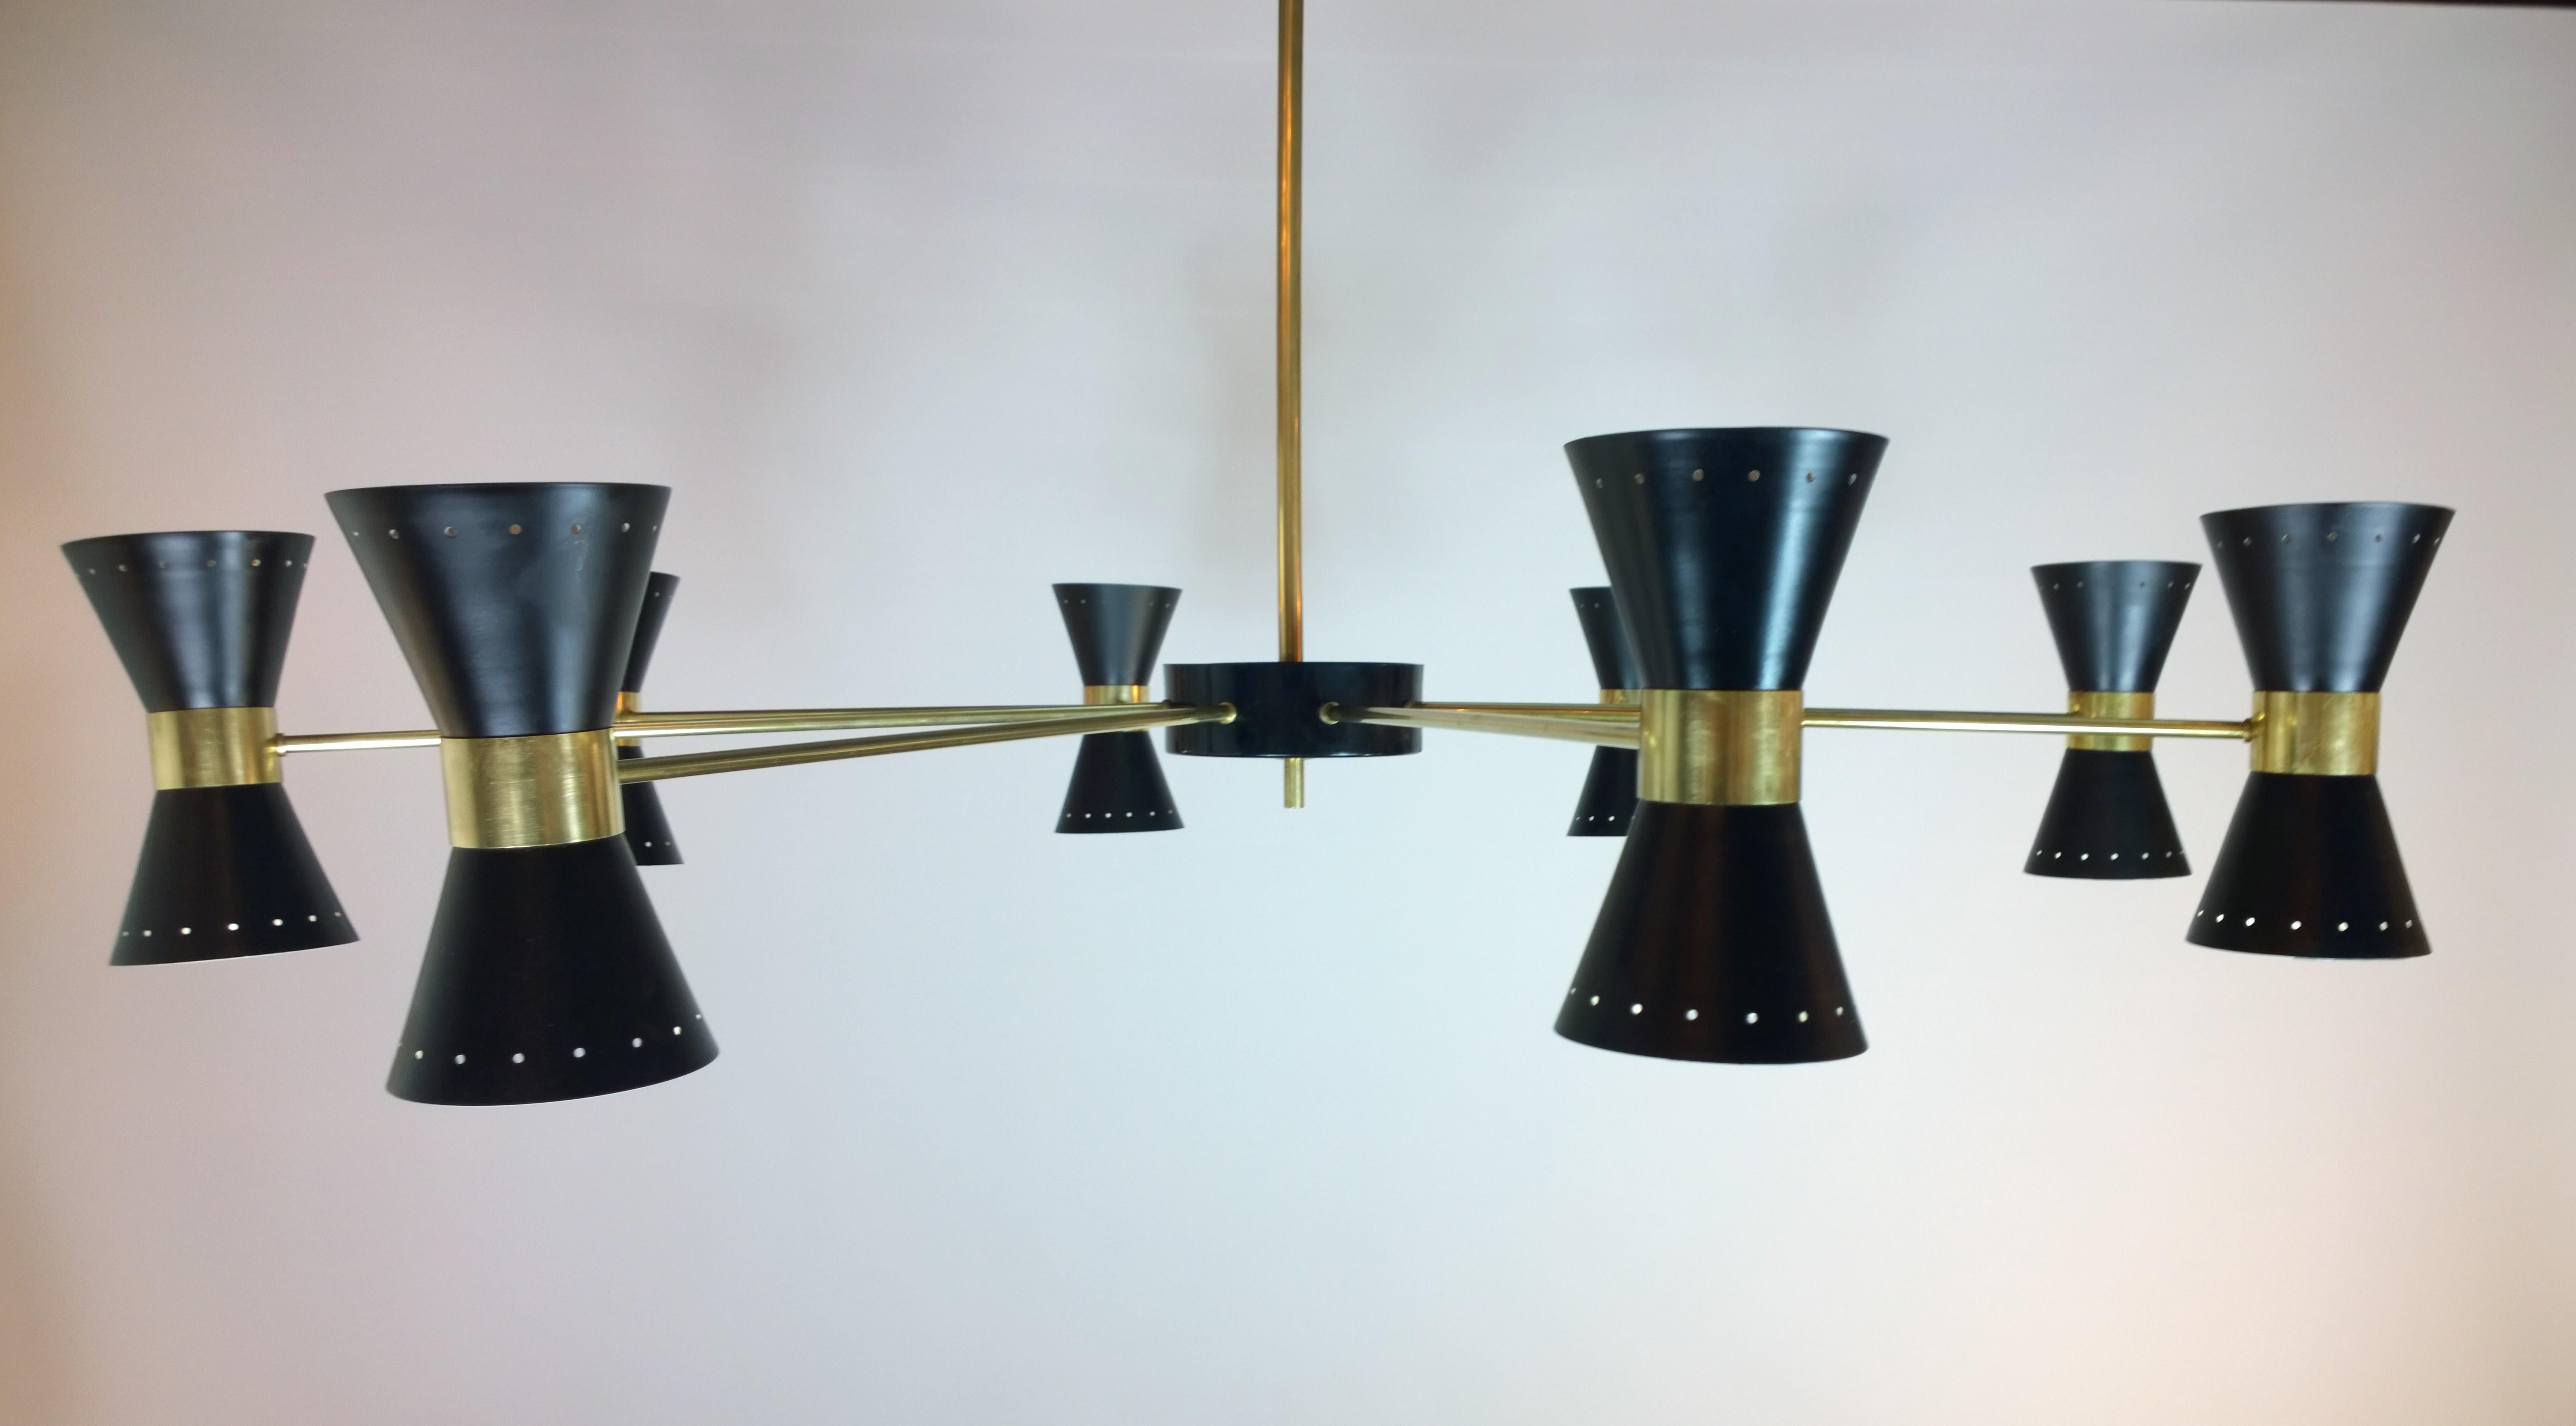 Offered is a Mid-Century Modern Italian vintage Stilnovo style brass eight-arm black enameled perforated brass double cone (16 socket) chandelier. This stunning vintage Mid-Century Modern Italian Stilnovo style light fixture / monumental chandelier